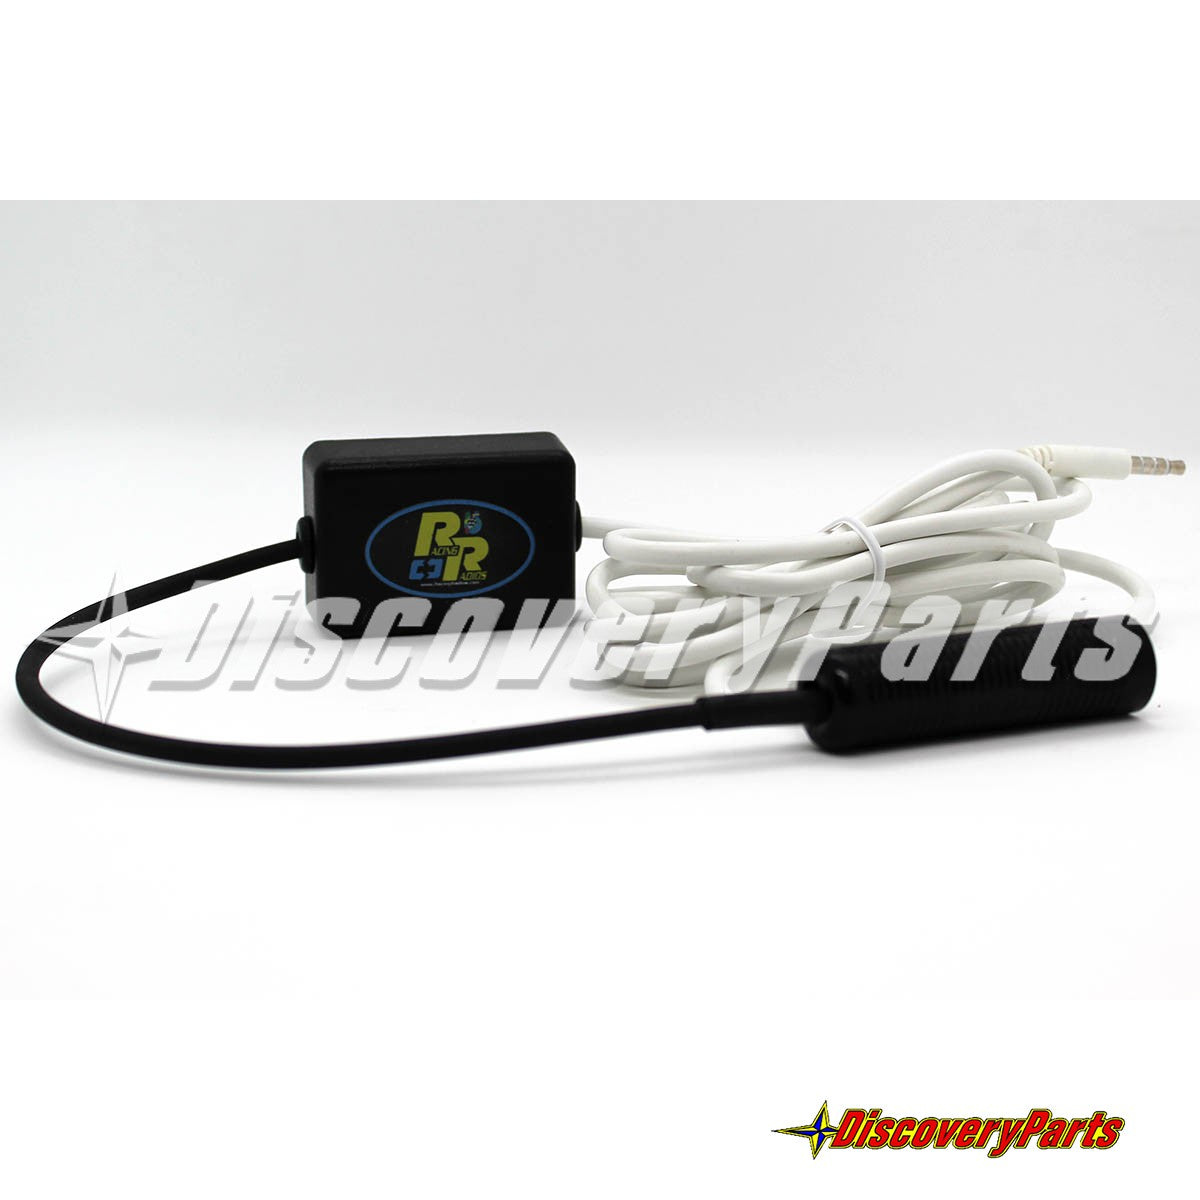 IMSA to Cell Phone Adapter Cable